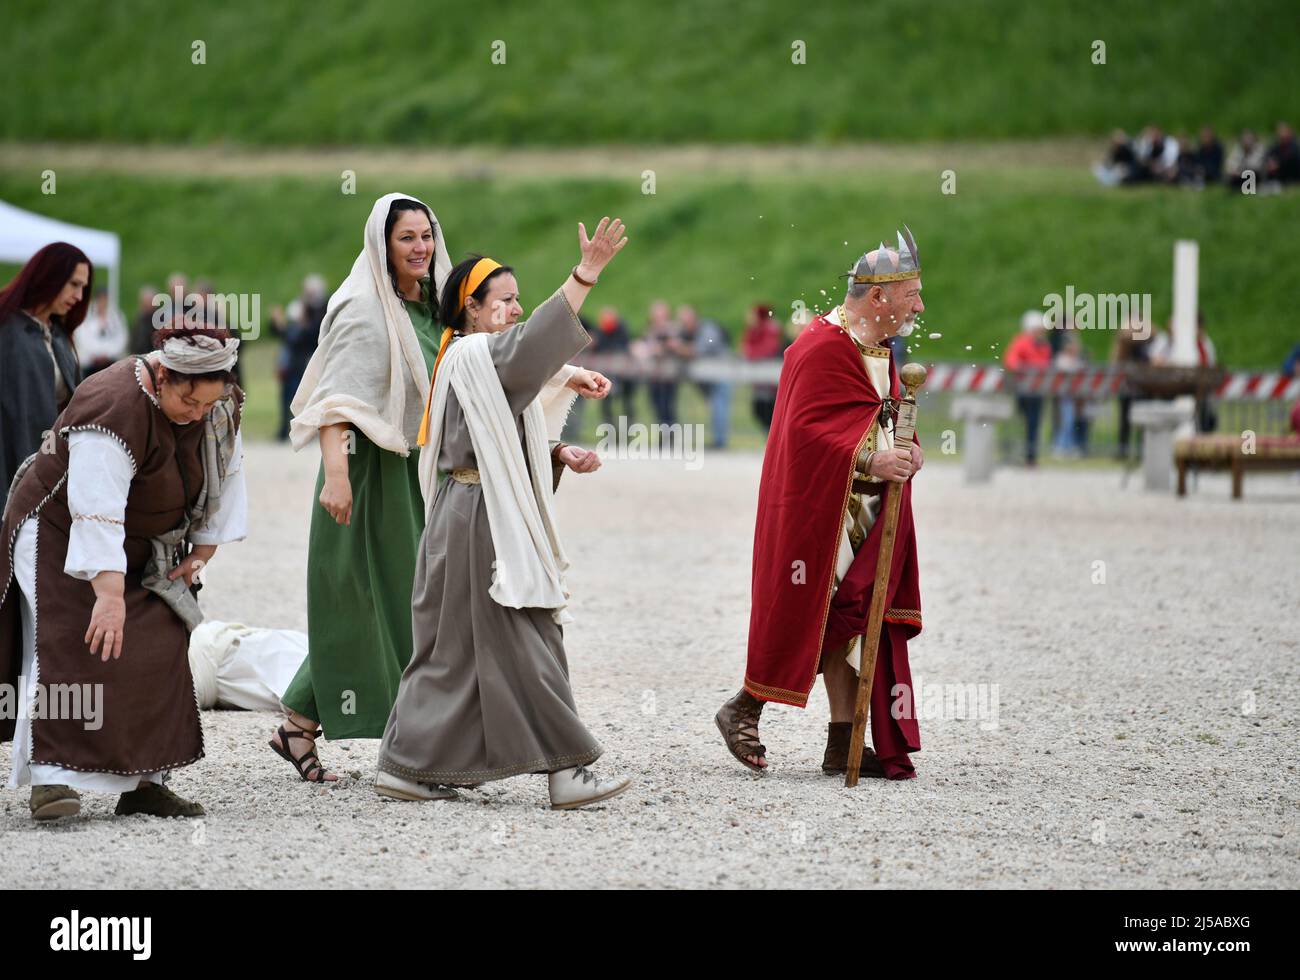 Rome, Italy. 21st Apr, 2022. Performers re-enact the birth of Rome to mark the city's birthday at the Circus Maximus in Rome, capital of Italy, on April 21, 2022. According to legend, Rome was founded on April 21, 753 B.C. Credit: Jin Mamengni/Xinhua/Alamy Live News Stock Photo